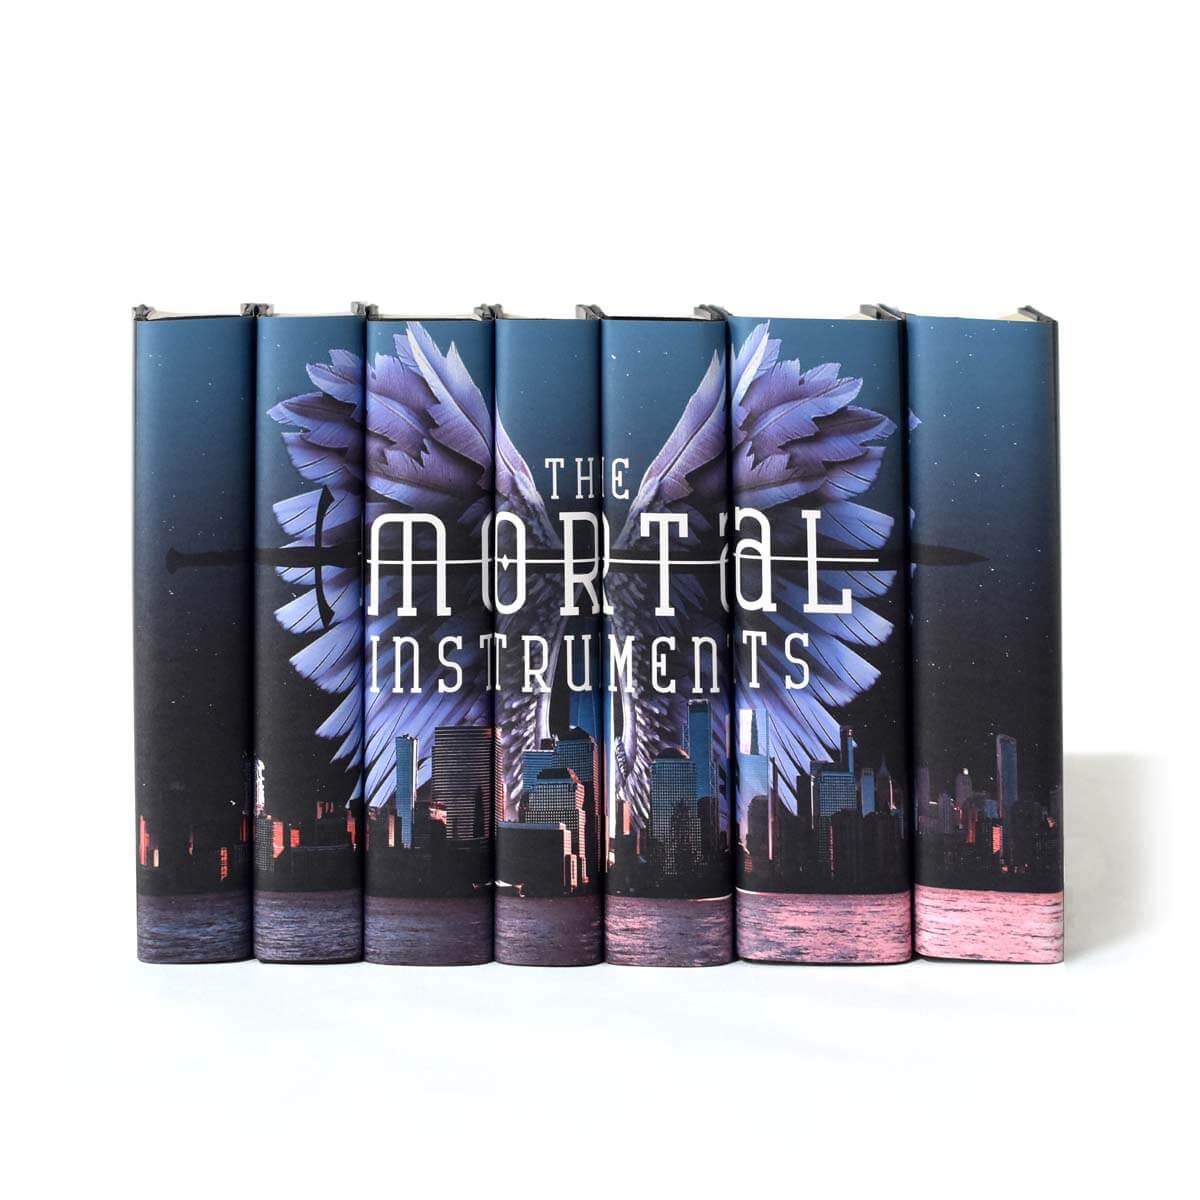 Enjoy the captivating world of demon hunters and angels with The Mortal Instruments, Cassandra Clare's popular fantasy young adult book series. Including custom-printed jackets, our made-to-order set is a great gift for fans of the series.